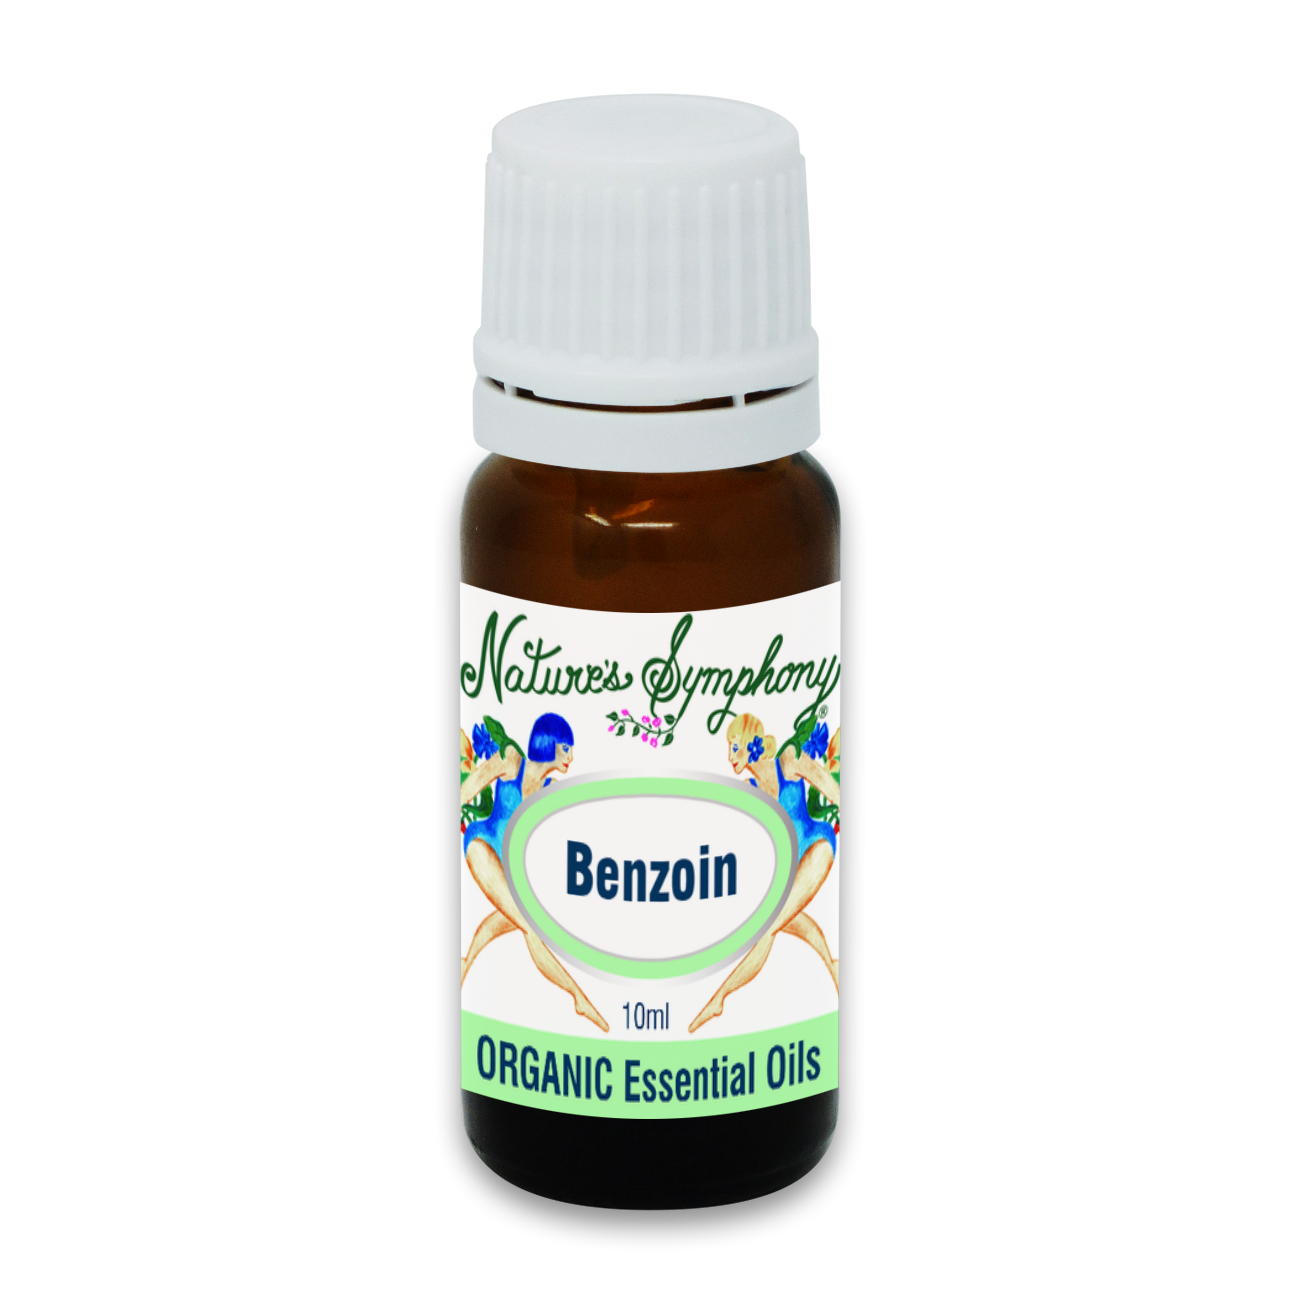 Benzoin, Organic/Wildcrafted oil - 10ml